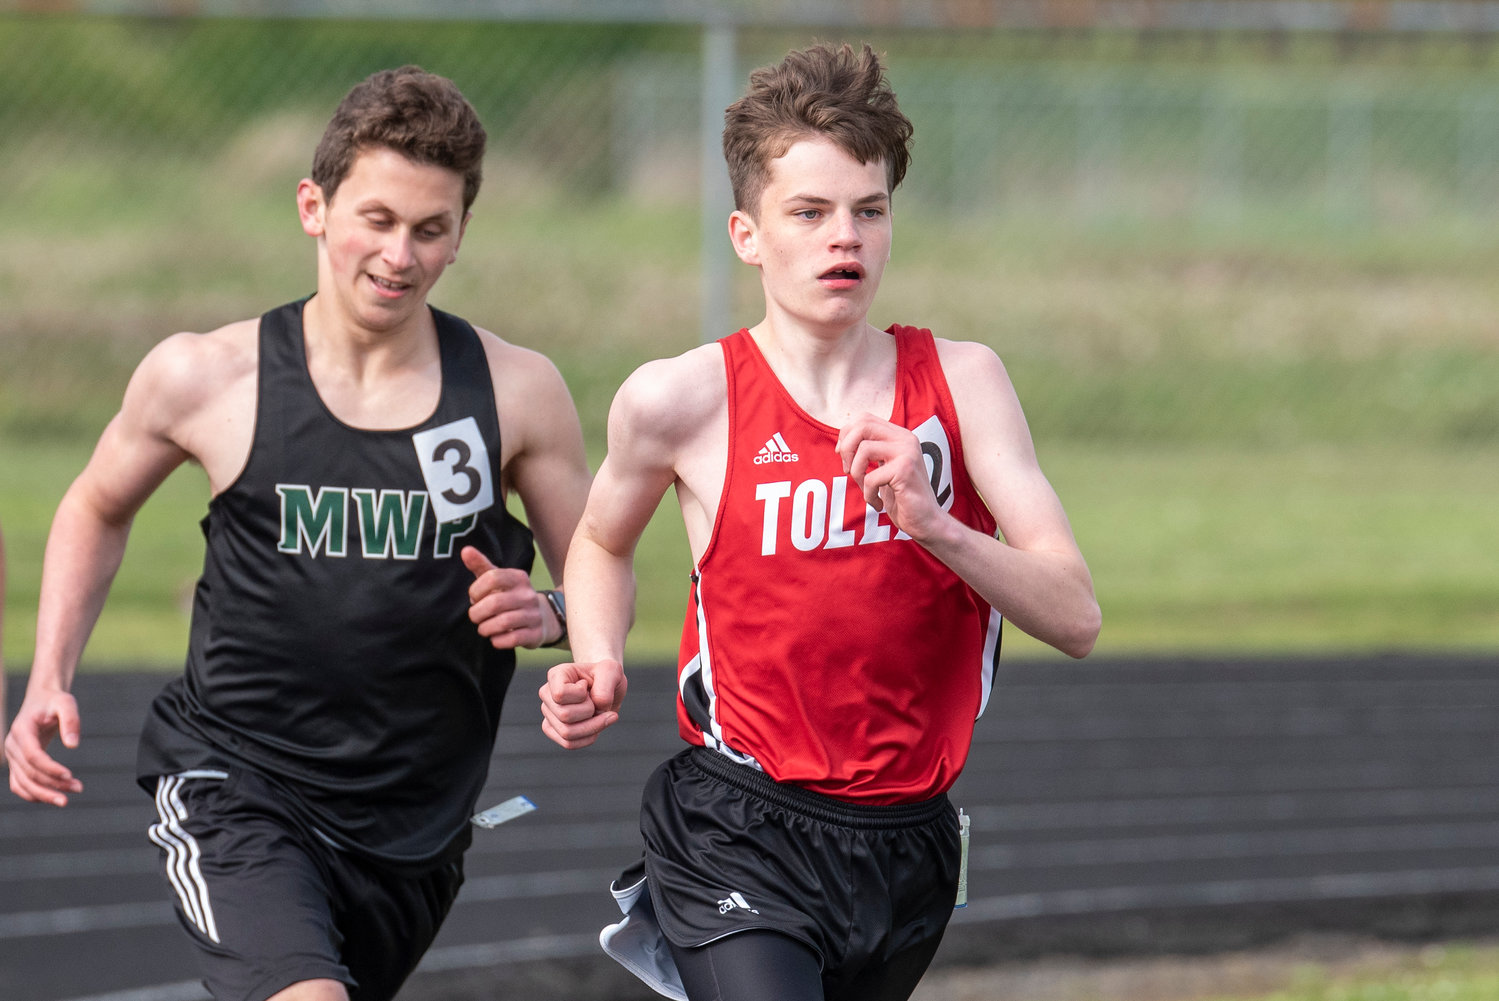 Toledo's Treyton Marty, right, leads the pack in the boys 1600-meter run at the Pirate Classic in Adna on Tuesday, May 3.